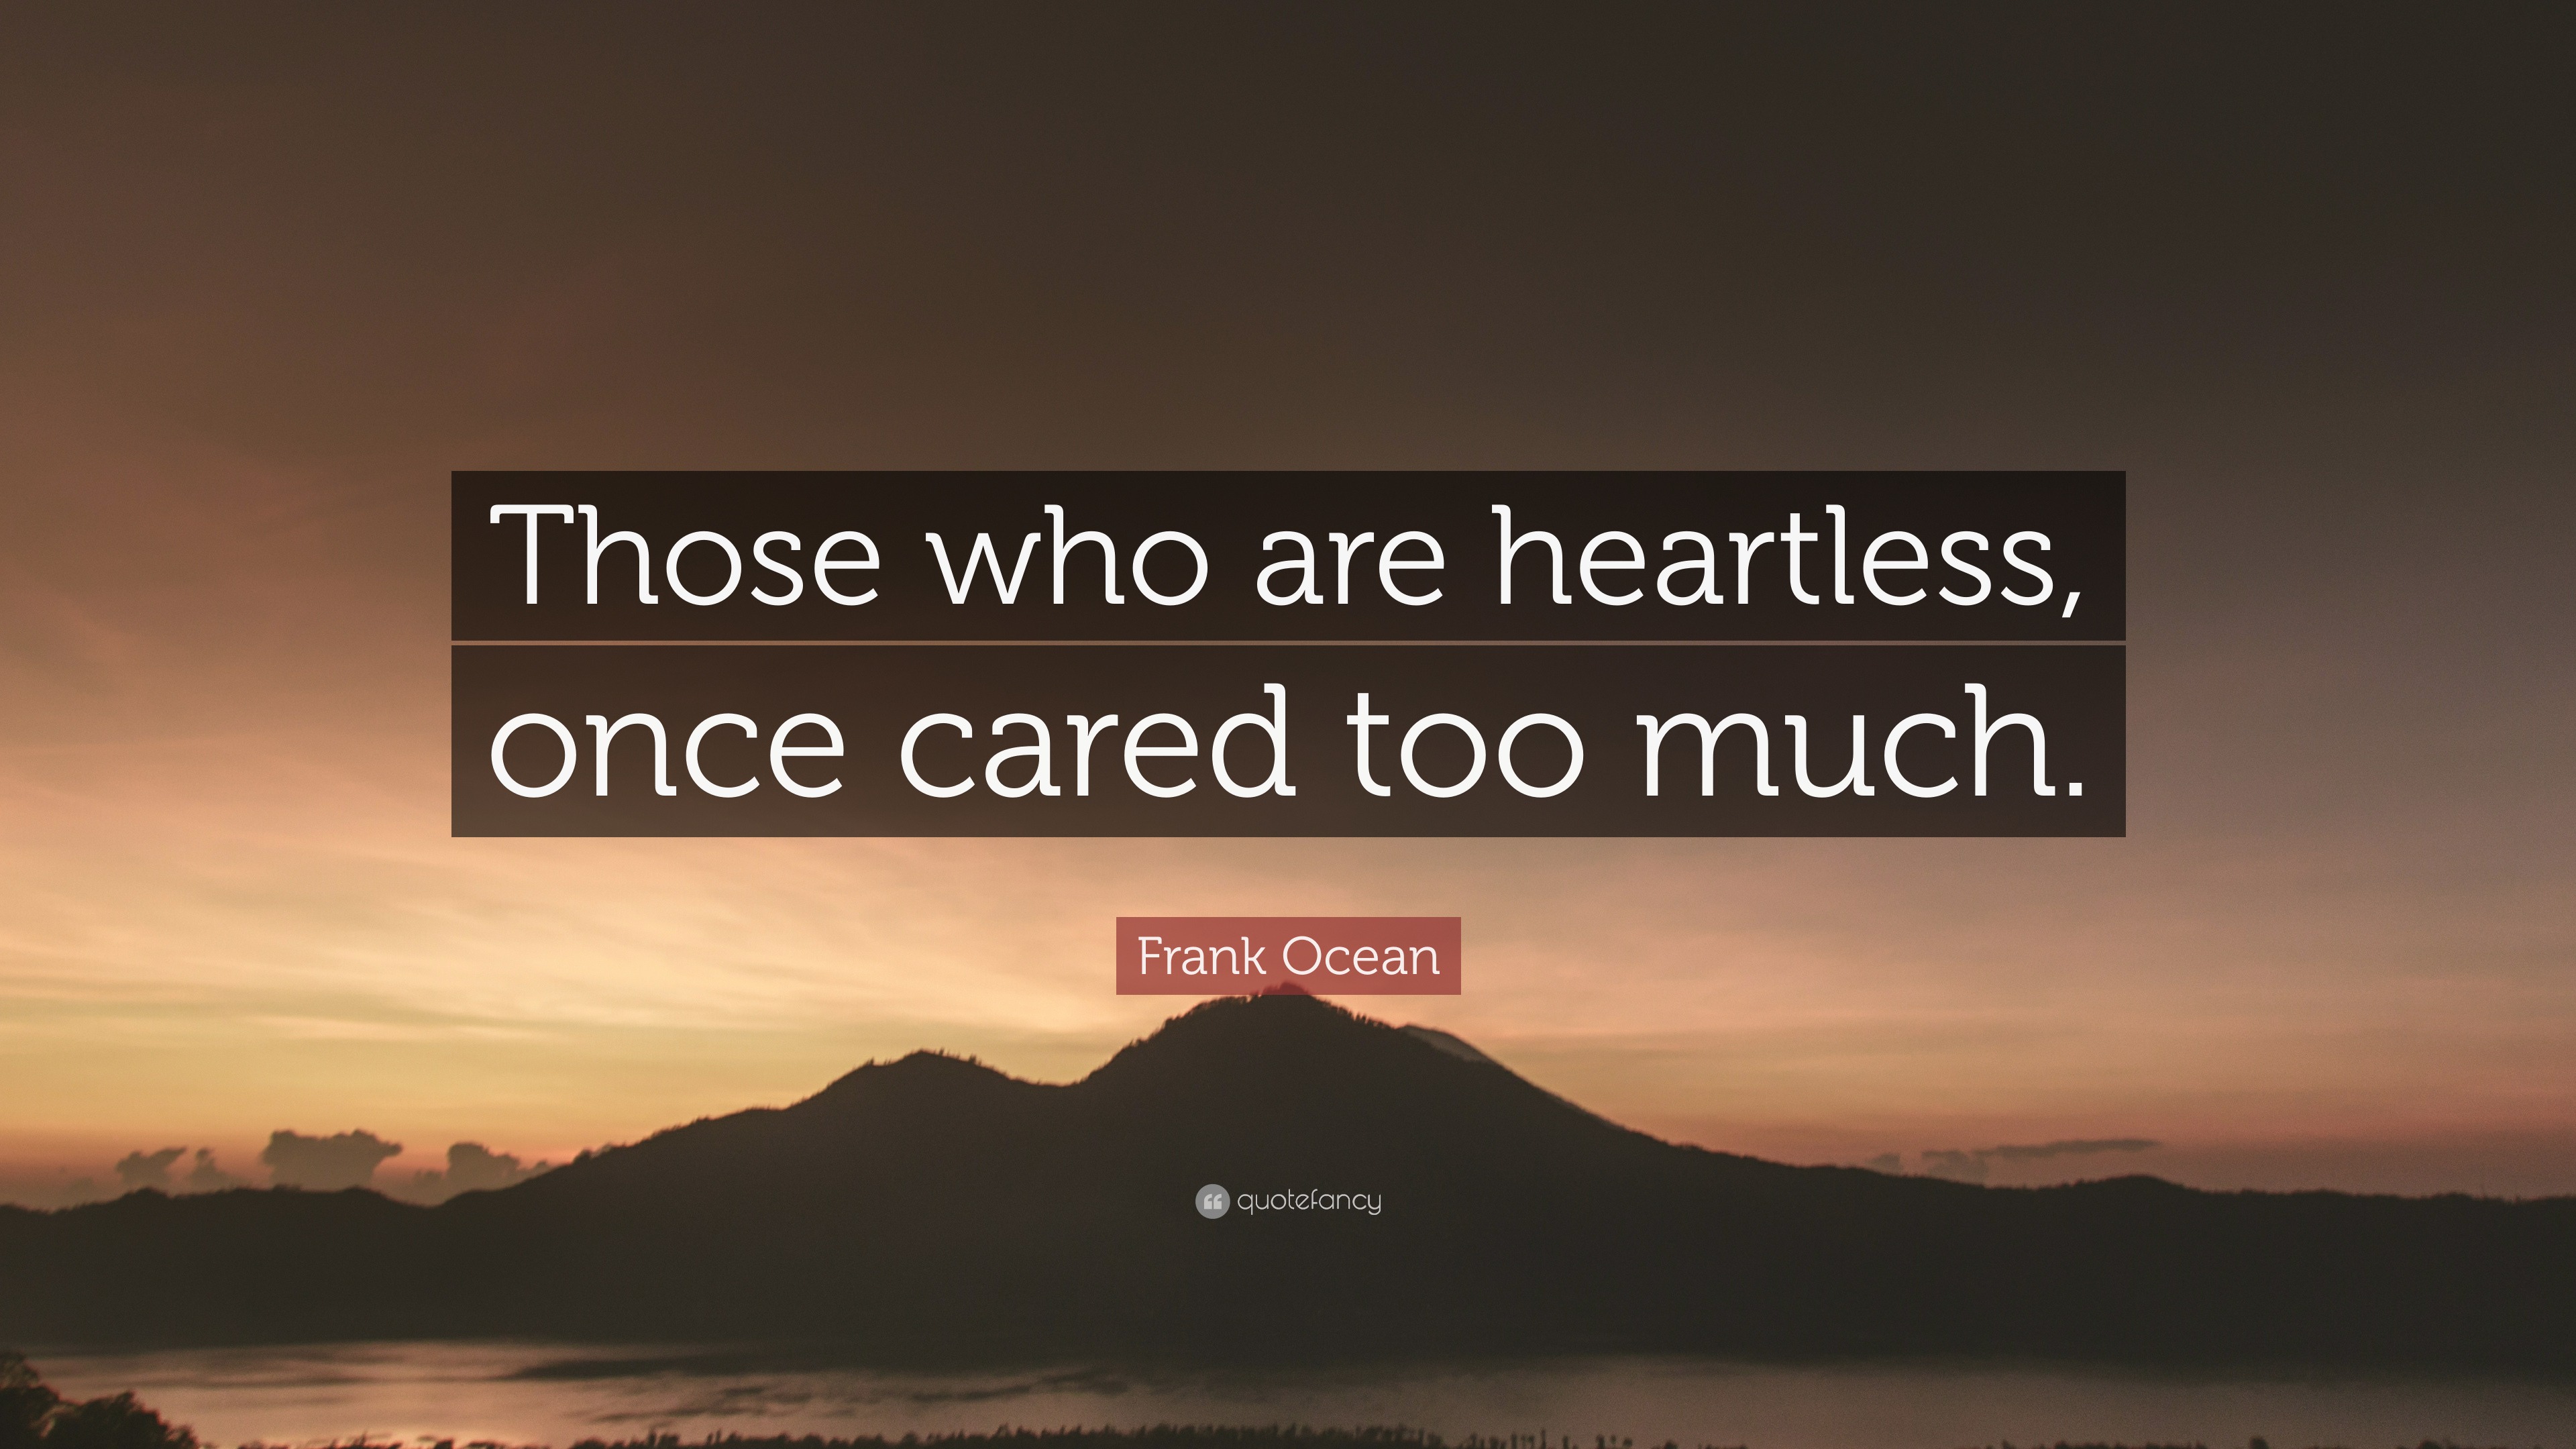 Frank Ocean Quote Those Who Are Heartless Once Cared Too Much 12 Wallpapers Quotefancy